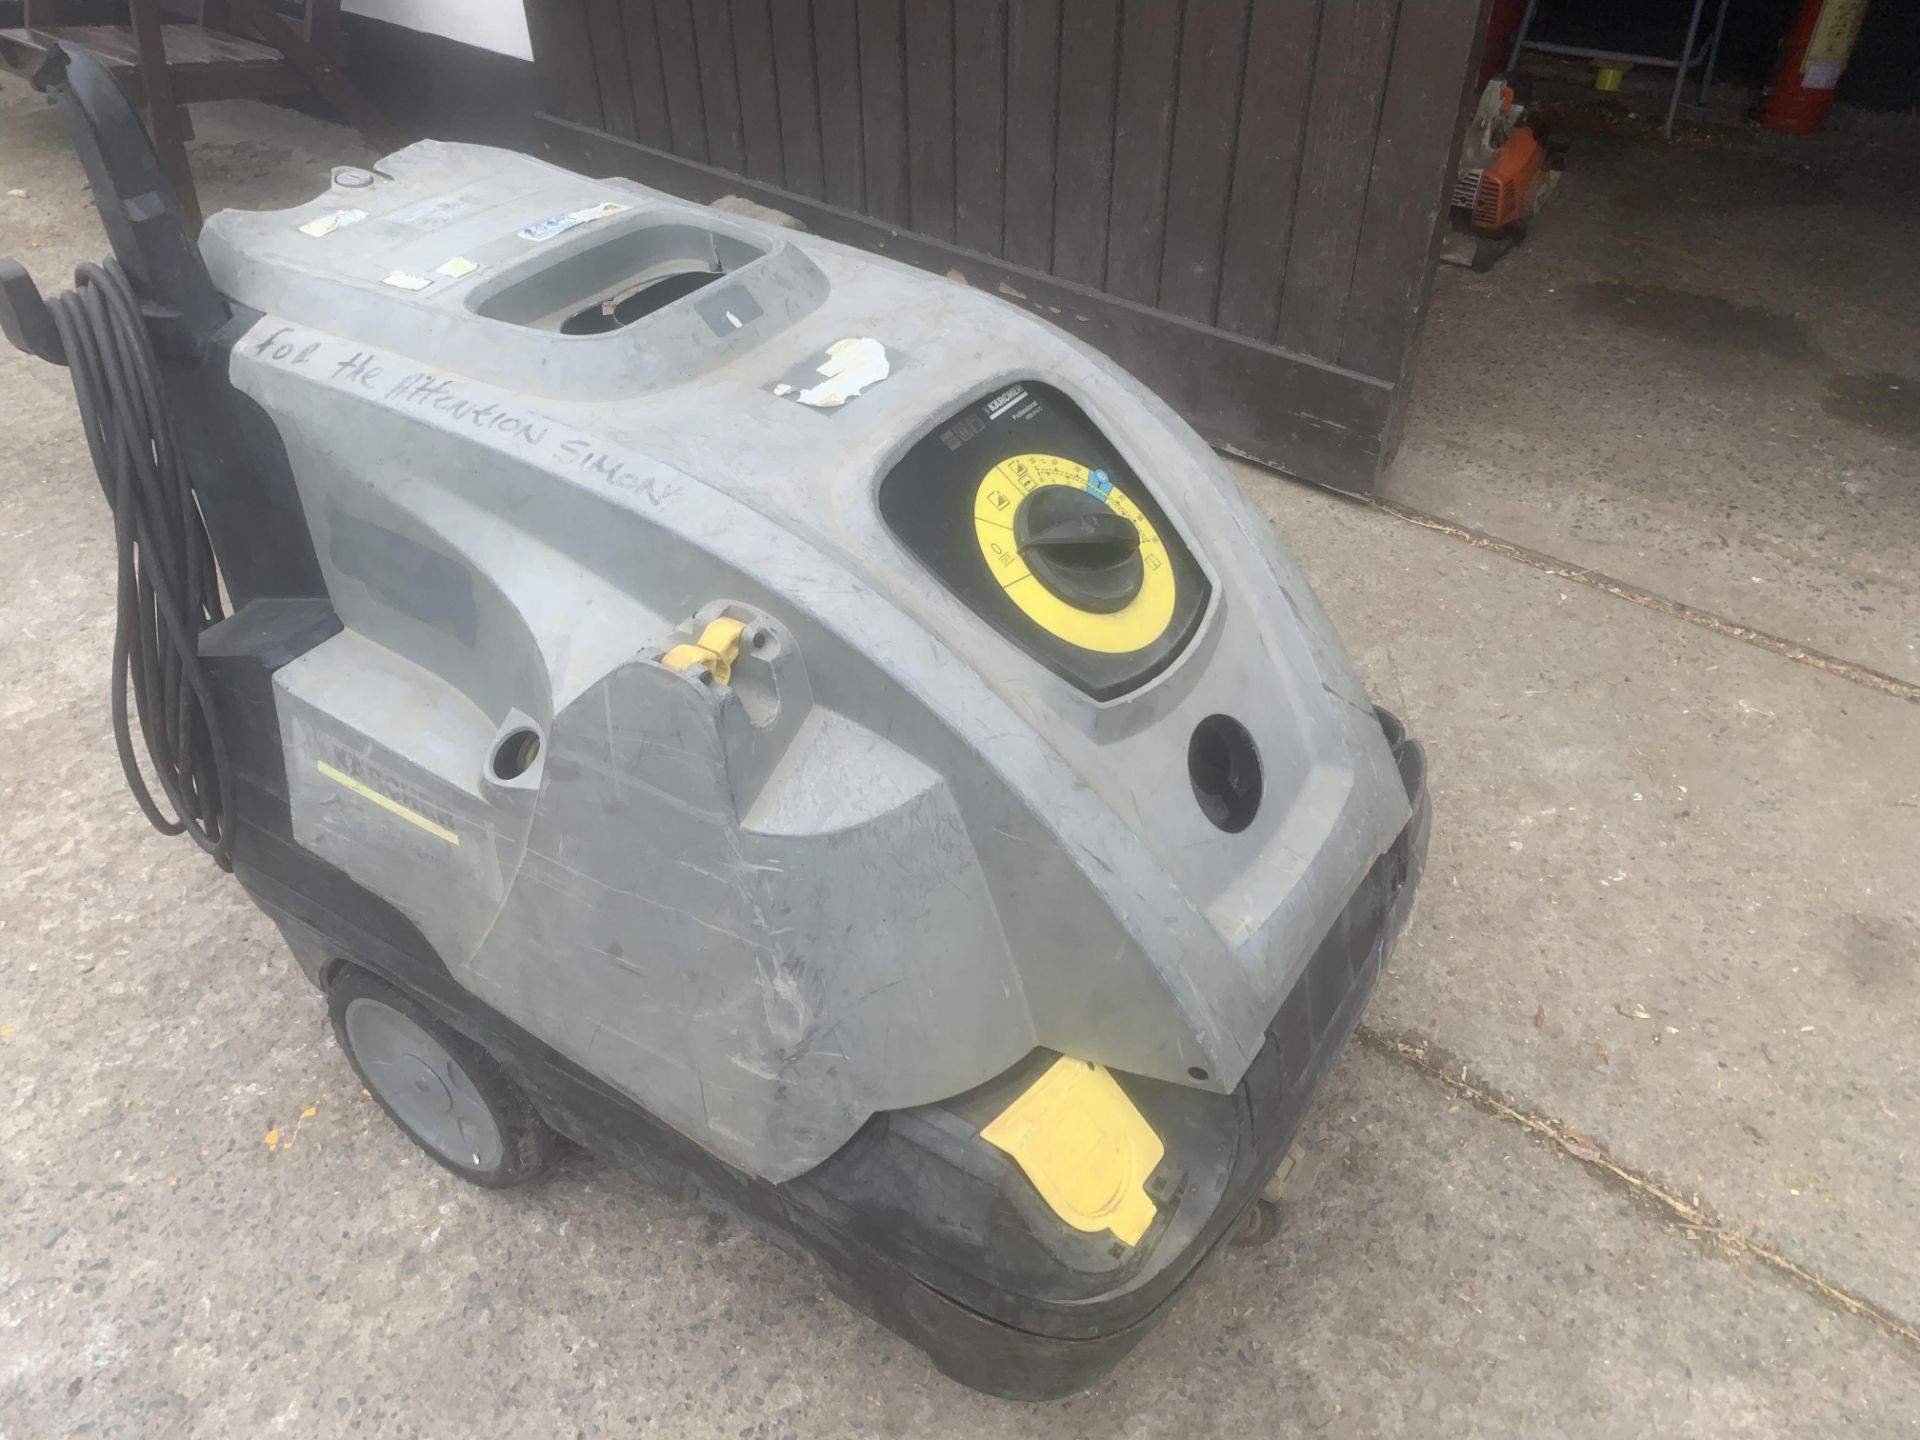 KARCHER PROFEESIONAL HOT AND COLD DIESEL POWER WASHER.LOCATION N IRELAND. - Image 3 of 7